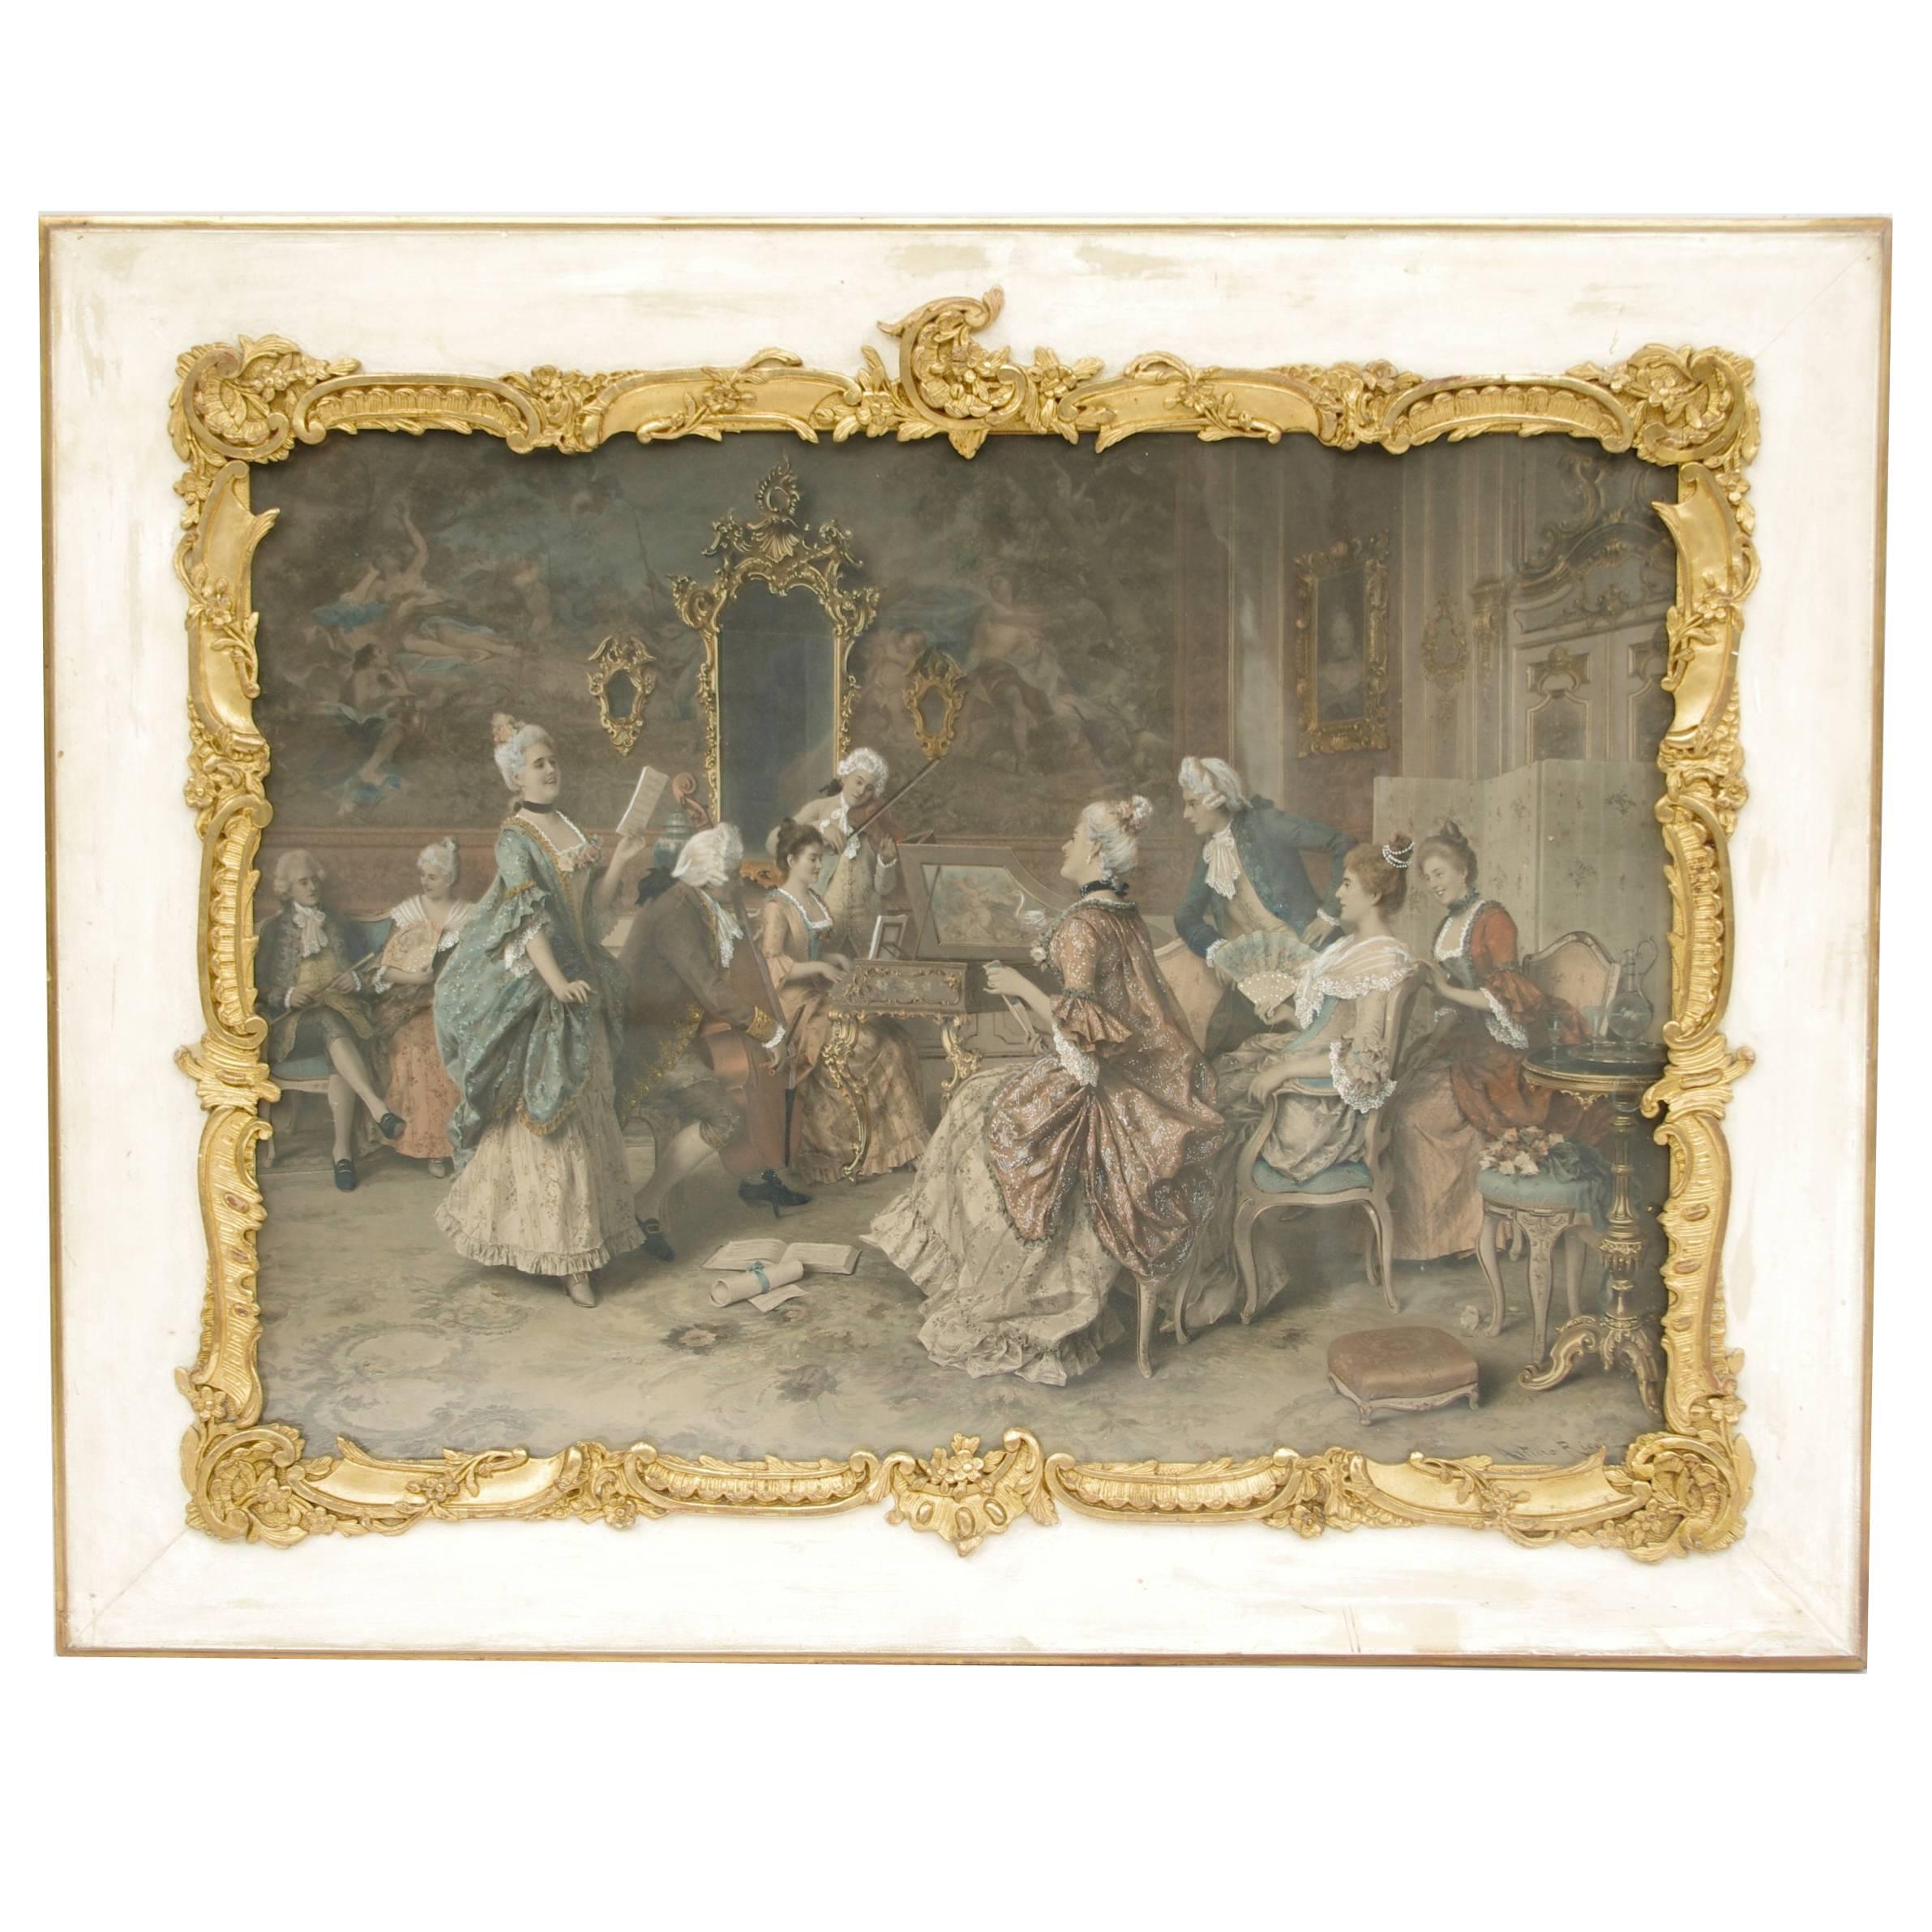 Etching "A Lively Concert" by Arturo Ricci